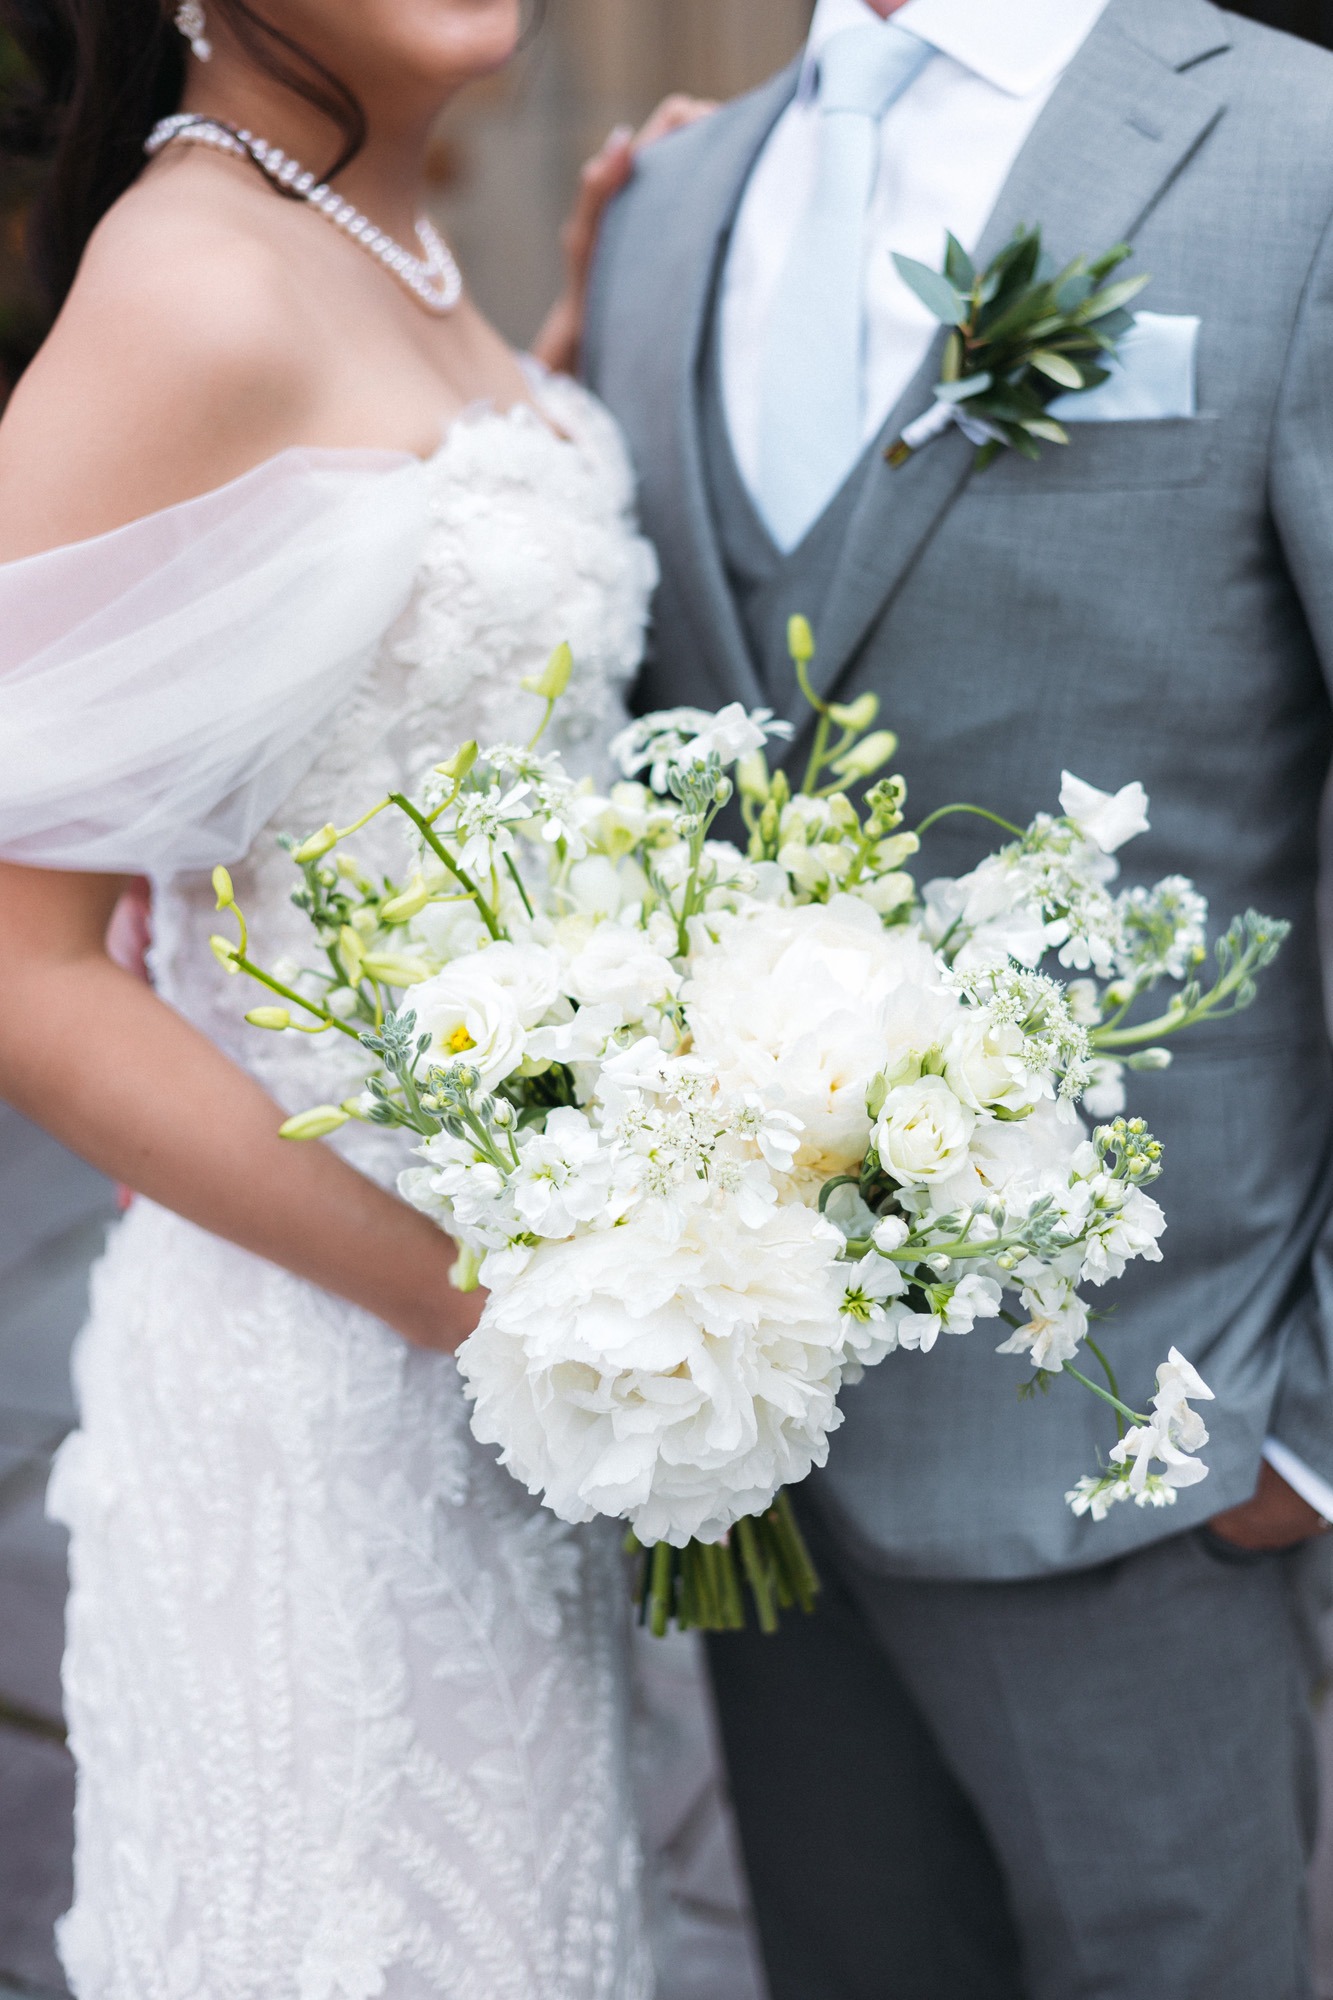 How Much to Budget for Wedding Flowers